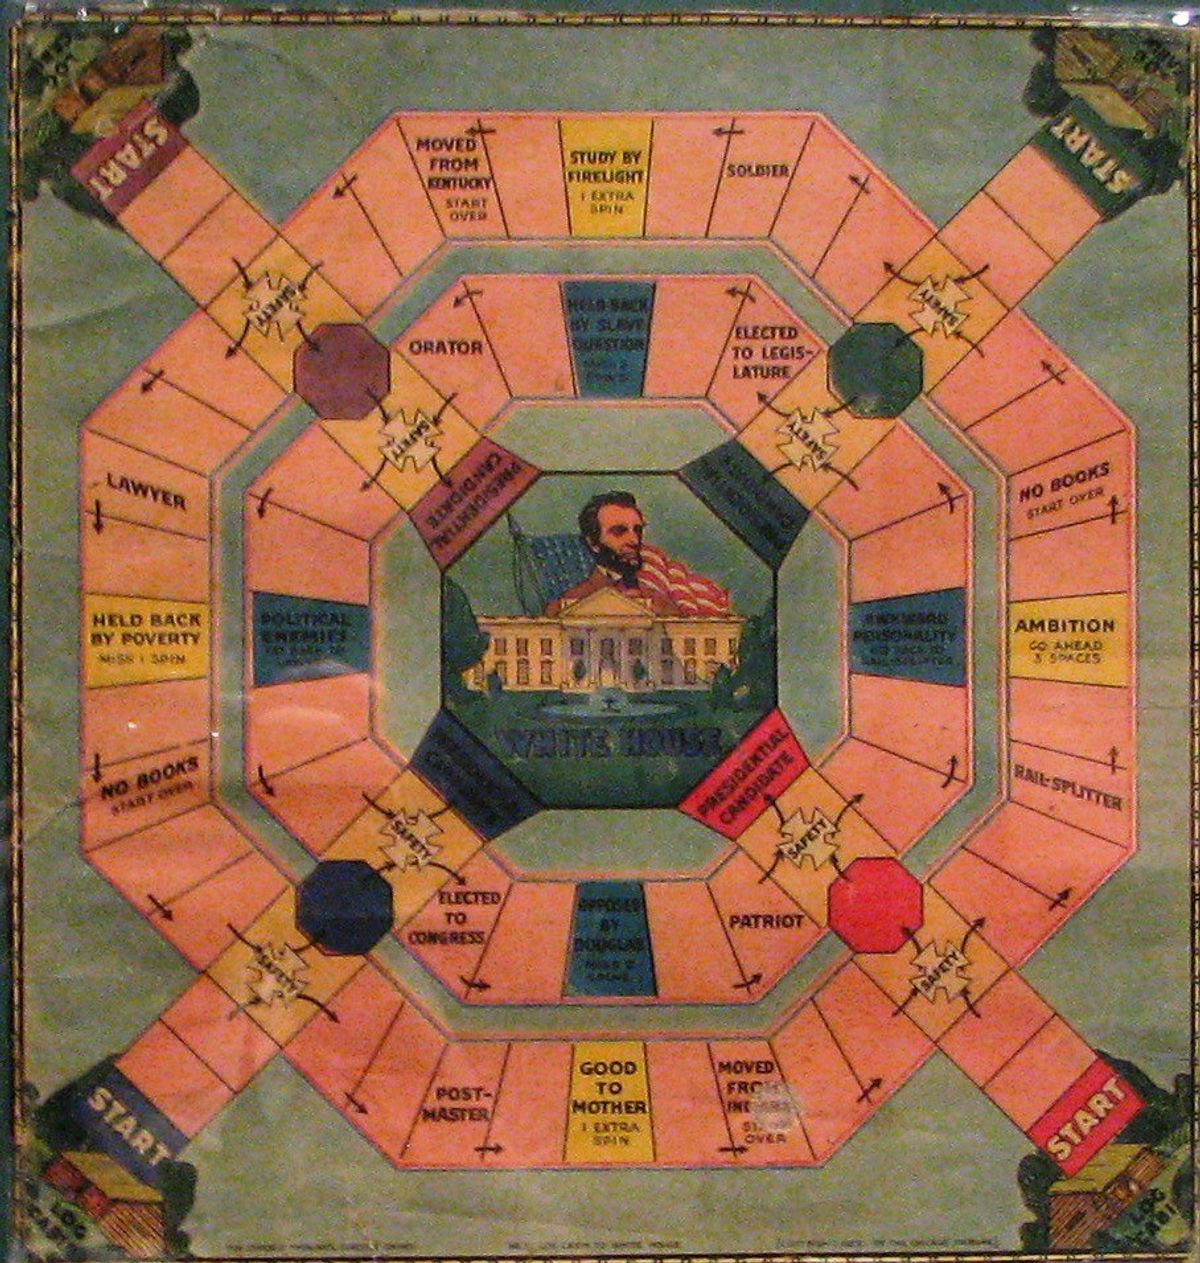 Historical Board Game Opponents